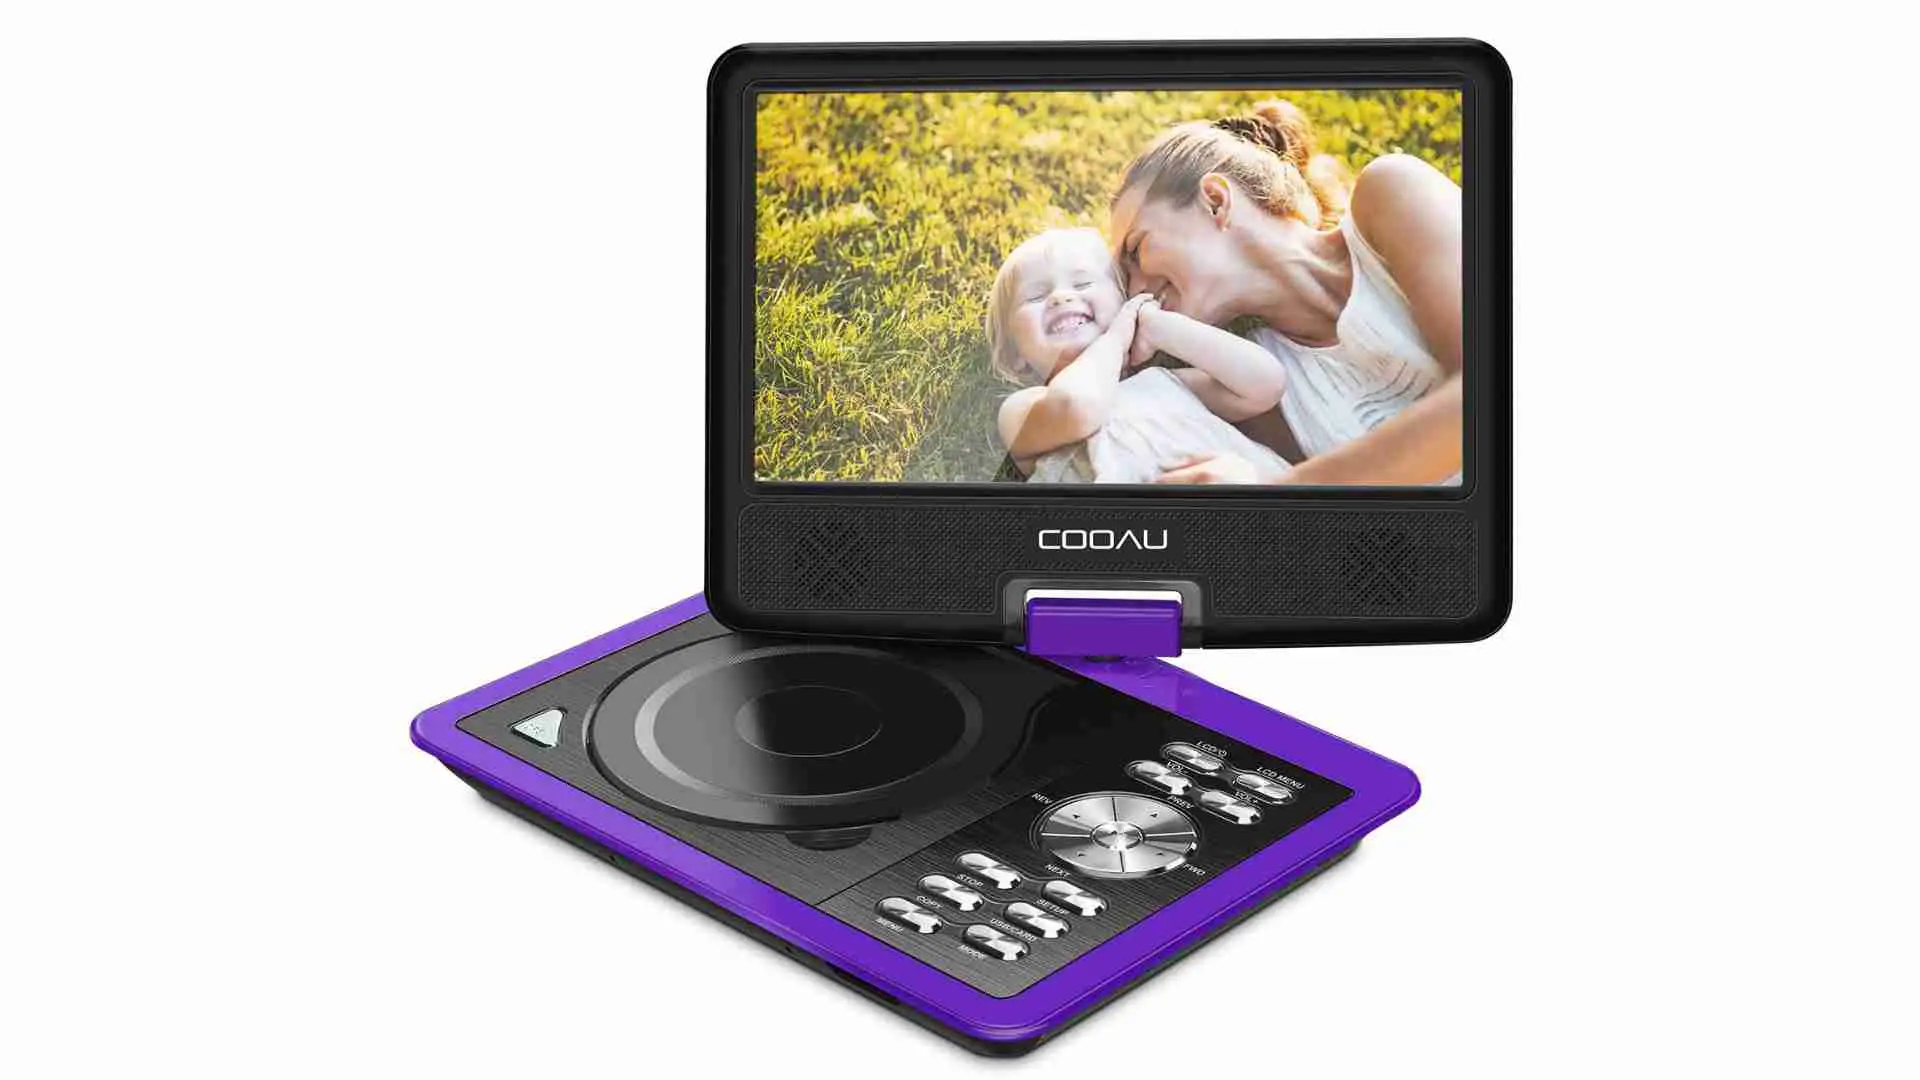 COOAU 11.5" Portable DVD Player